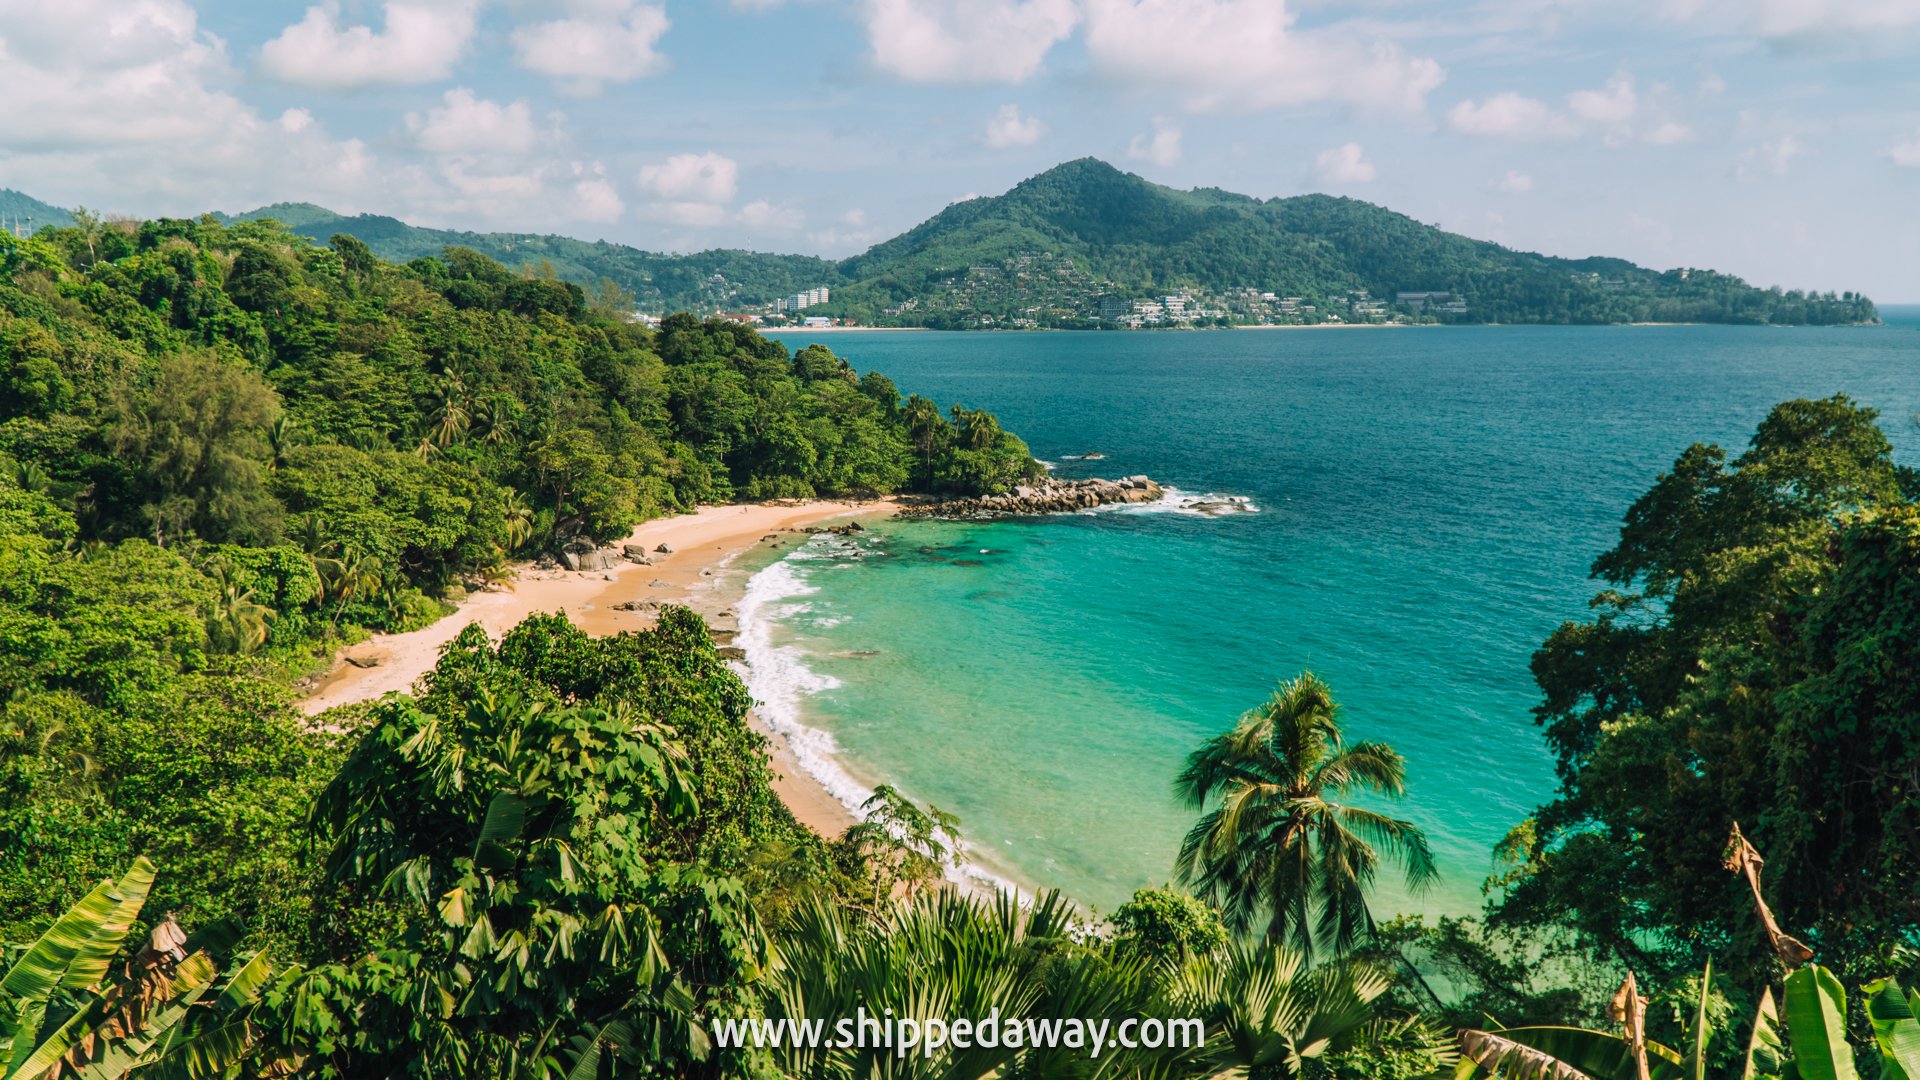 Top Things To Do in Phuket, Thailand - Travel Guide with best places to visit